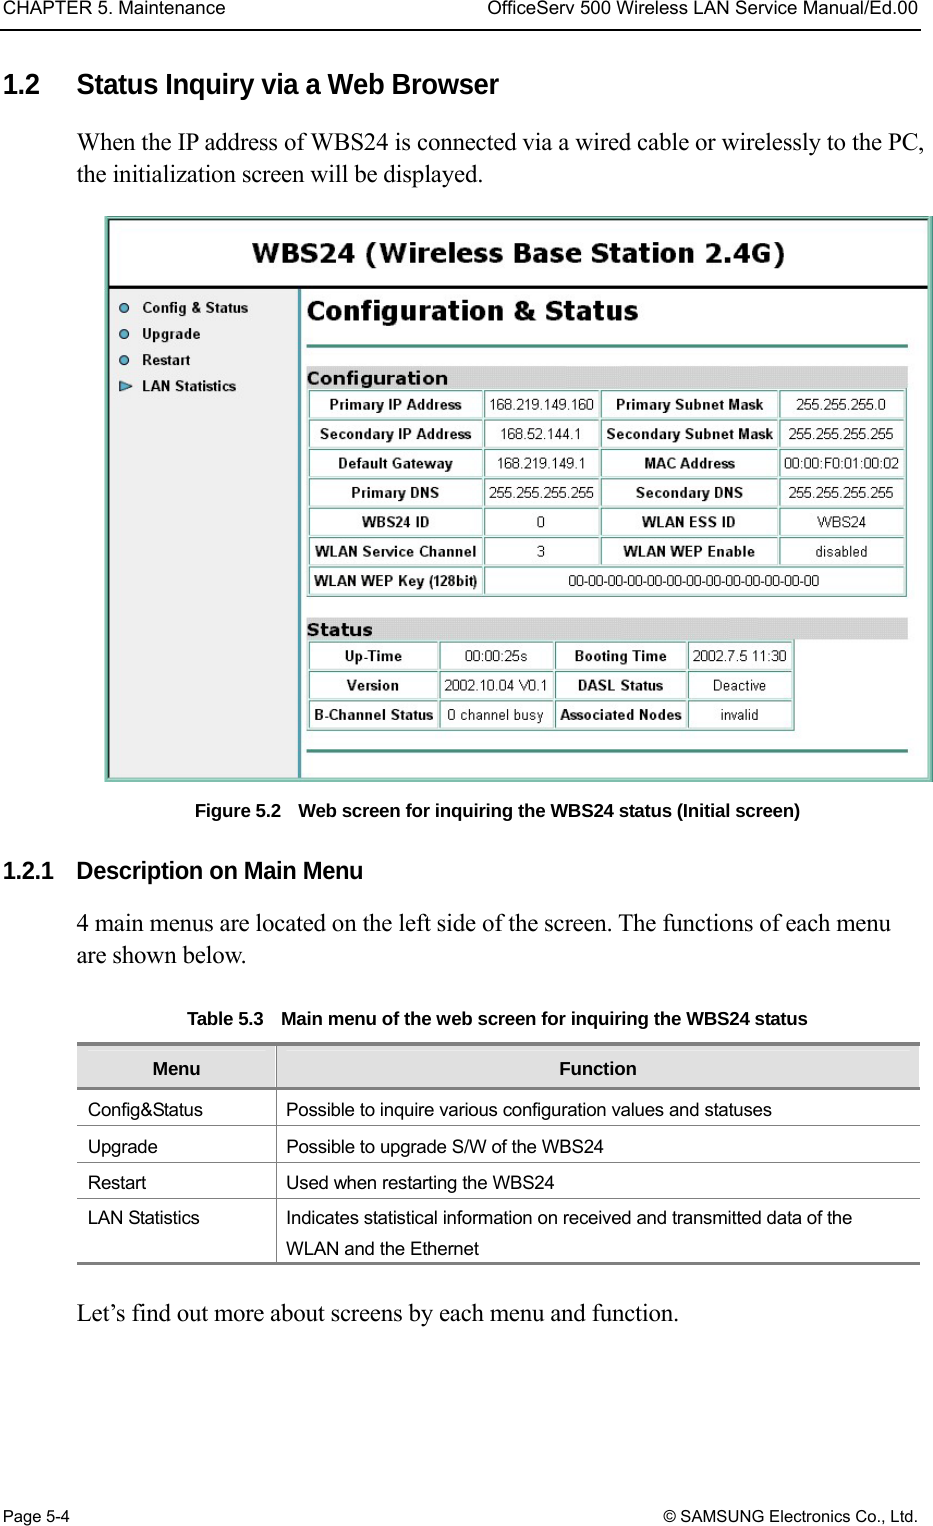 CHAPTER 5. Maintenance  OfficeServ 500 Wireless LAN Service Manual/Ed.00 Page 5-4 © SAMSUNG Electronics Co., Ltd. 1.2  Status Inquiry via a Web Browser When the IP address of WBS24 is connected via a wired cable or wirelessly to the PC, the initialization screen will be displayed. Figure 5.2    Web screen for inquiring the WBS24 status (Initial screen)  1.2.1  Description on Main Menu   4 main menus are located on the left side of the screen. The functions of each menu are shown below.  Table 5.3    Main menu of the web screen for inquiring the WBS24 status Menu  Function Config&amp;Status  Possible to inquire various configuration values and statuses Upgrade  Possible to upgrade S/W of the WBS24 Restart  Used when restarting the WBS24   LAN Statistics  Indicates statistical information on received and transmitted data of the WLAN and the Ethernet  Let’s find out more about screens by each menu and function.     